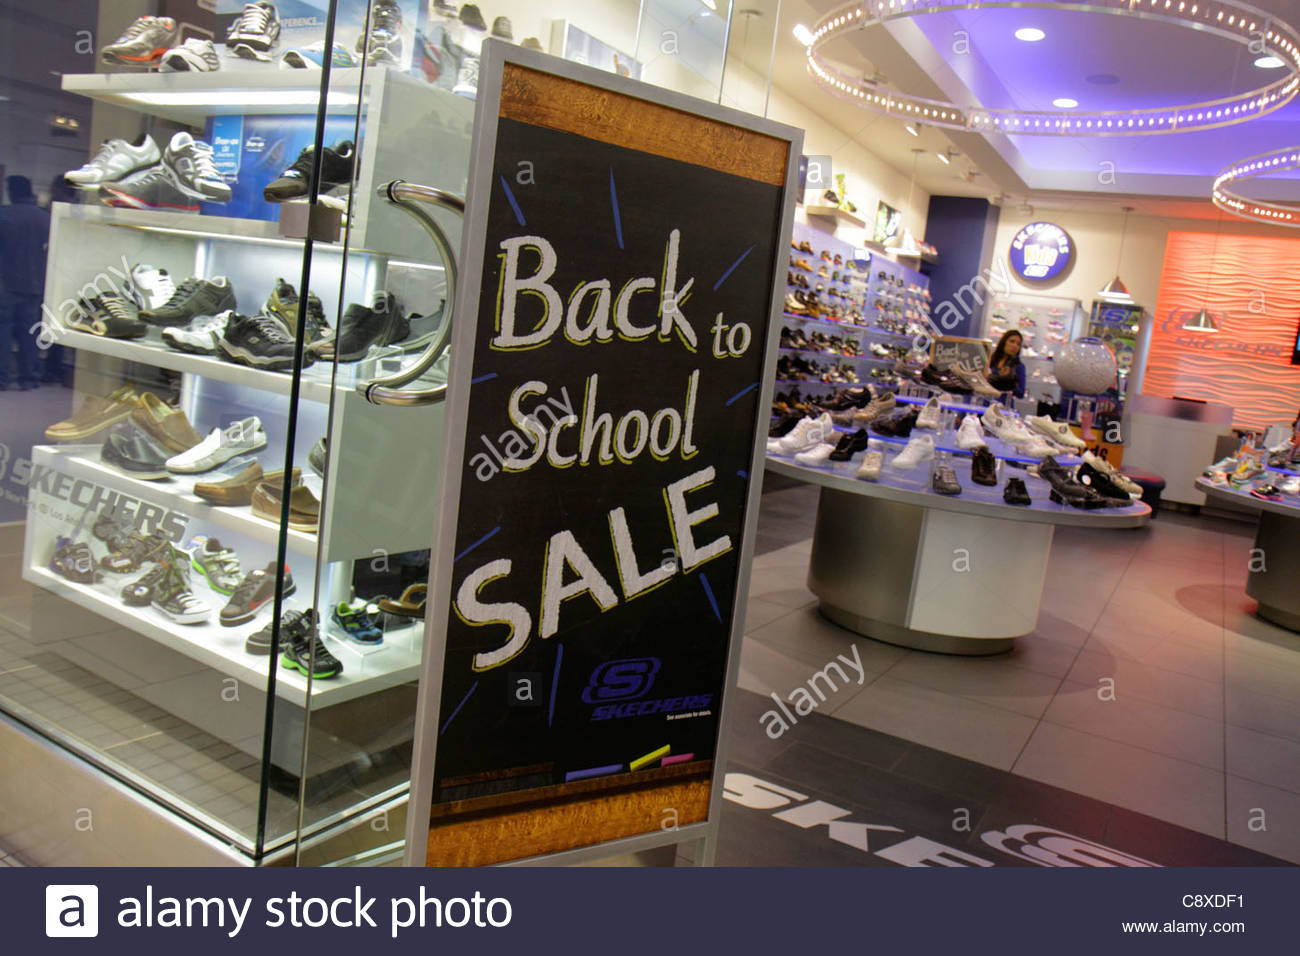 which stores sell skechers